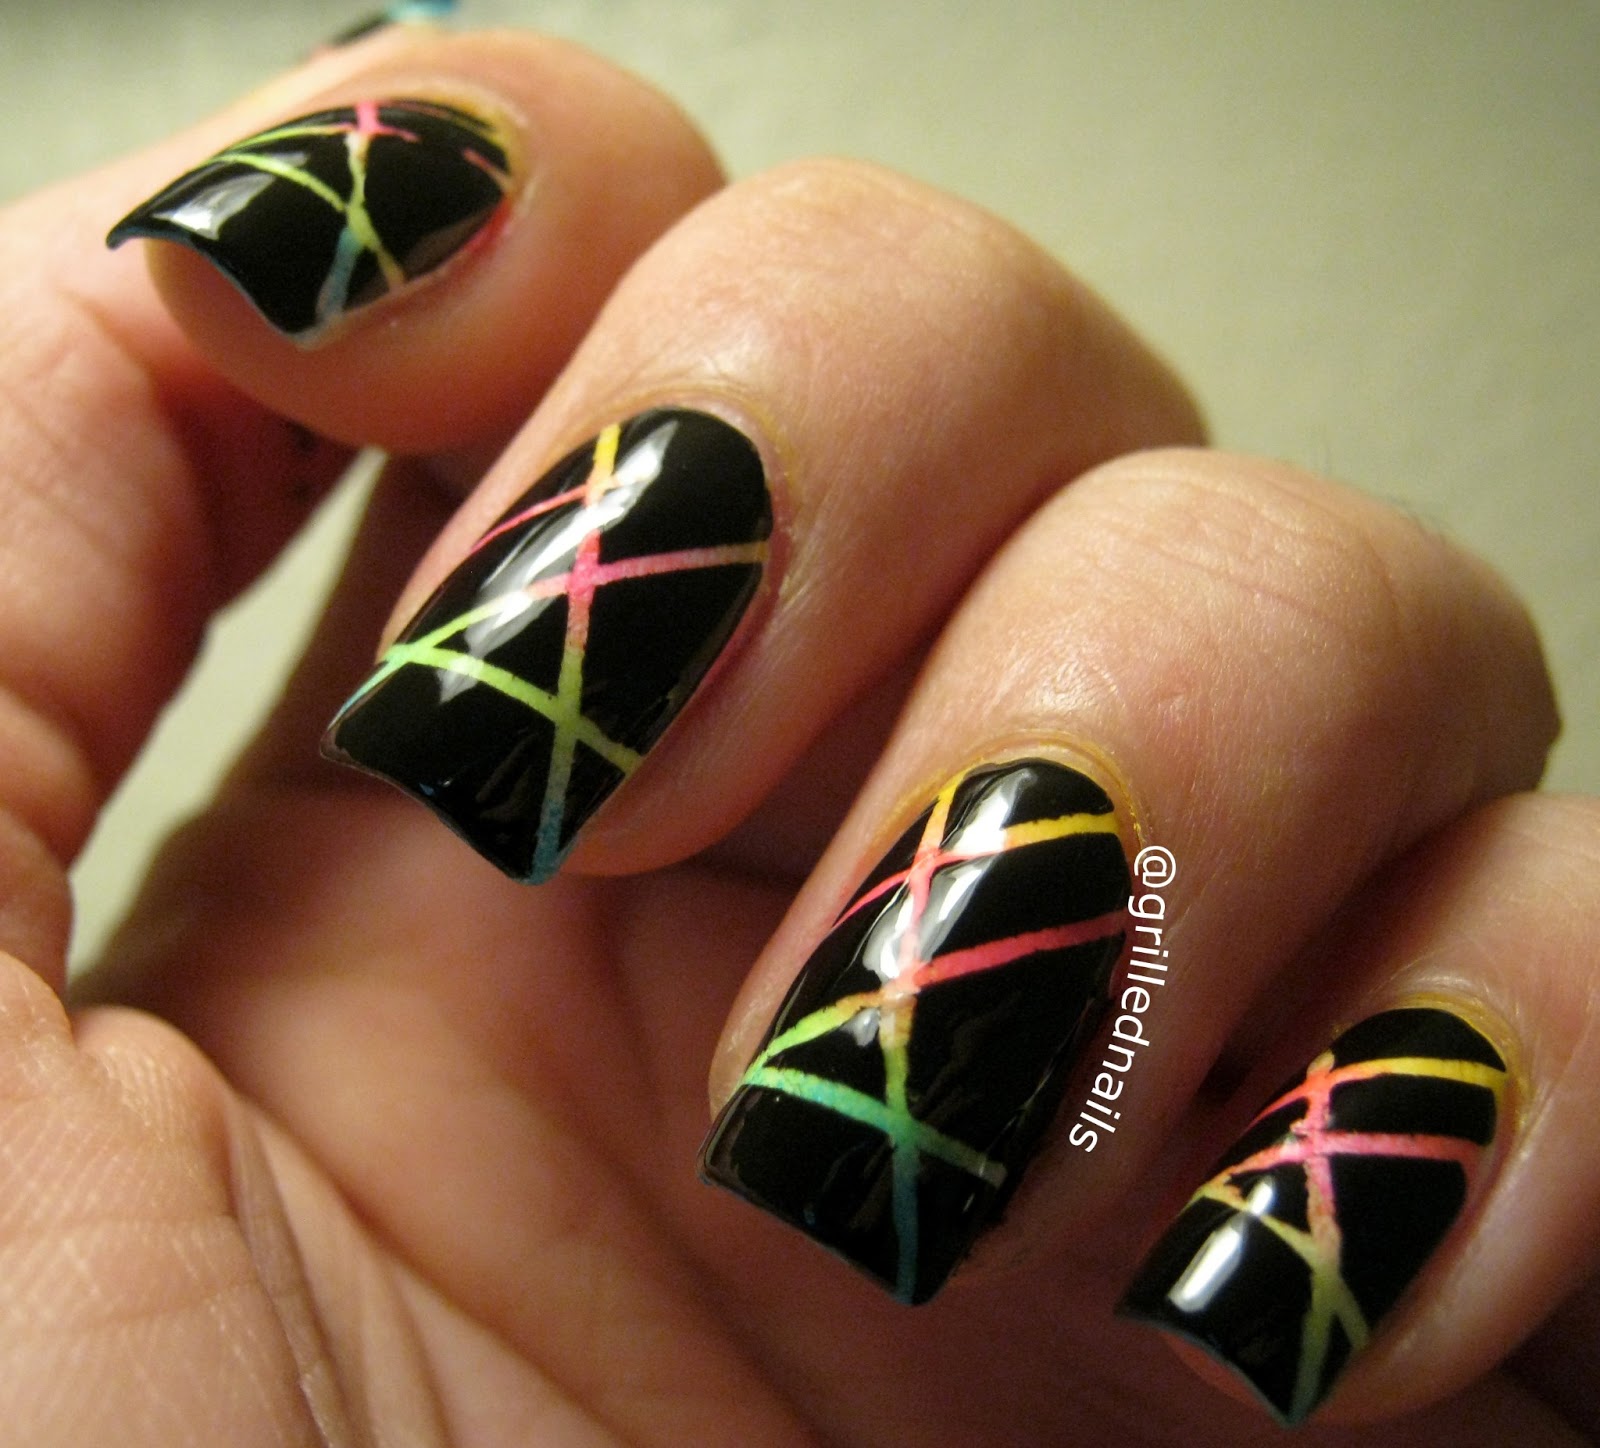 Nail Art Designs With Tape | Nail Designs, Hair Styles, Tattoos and